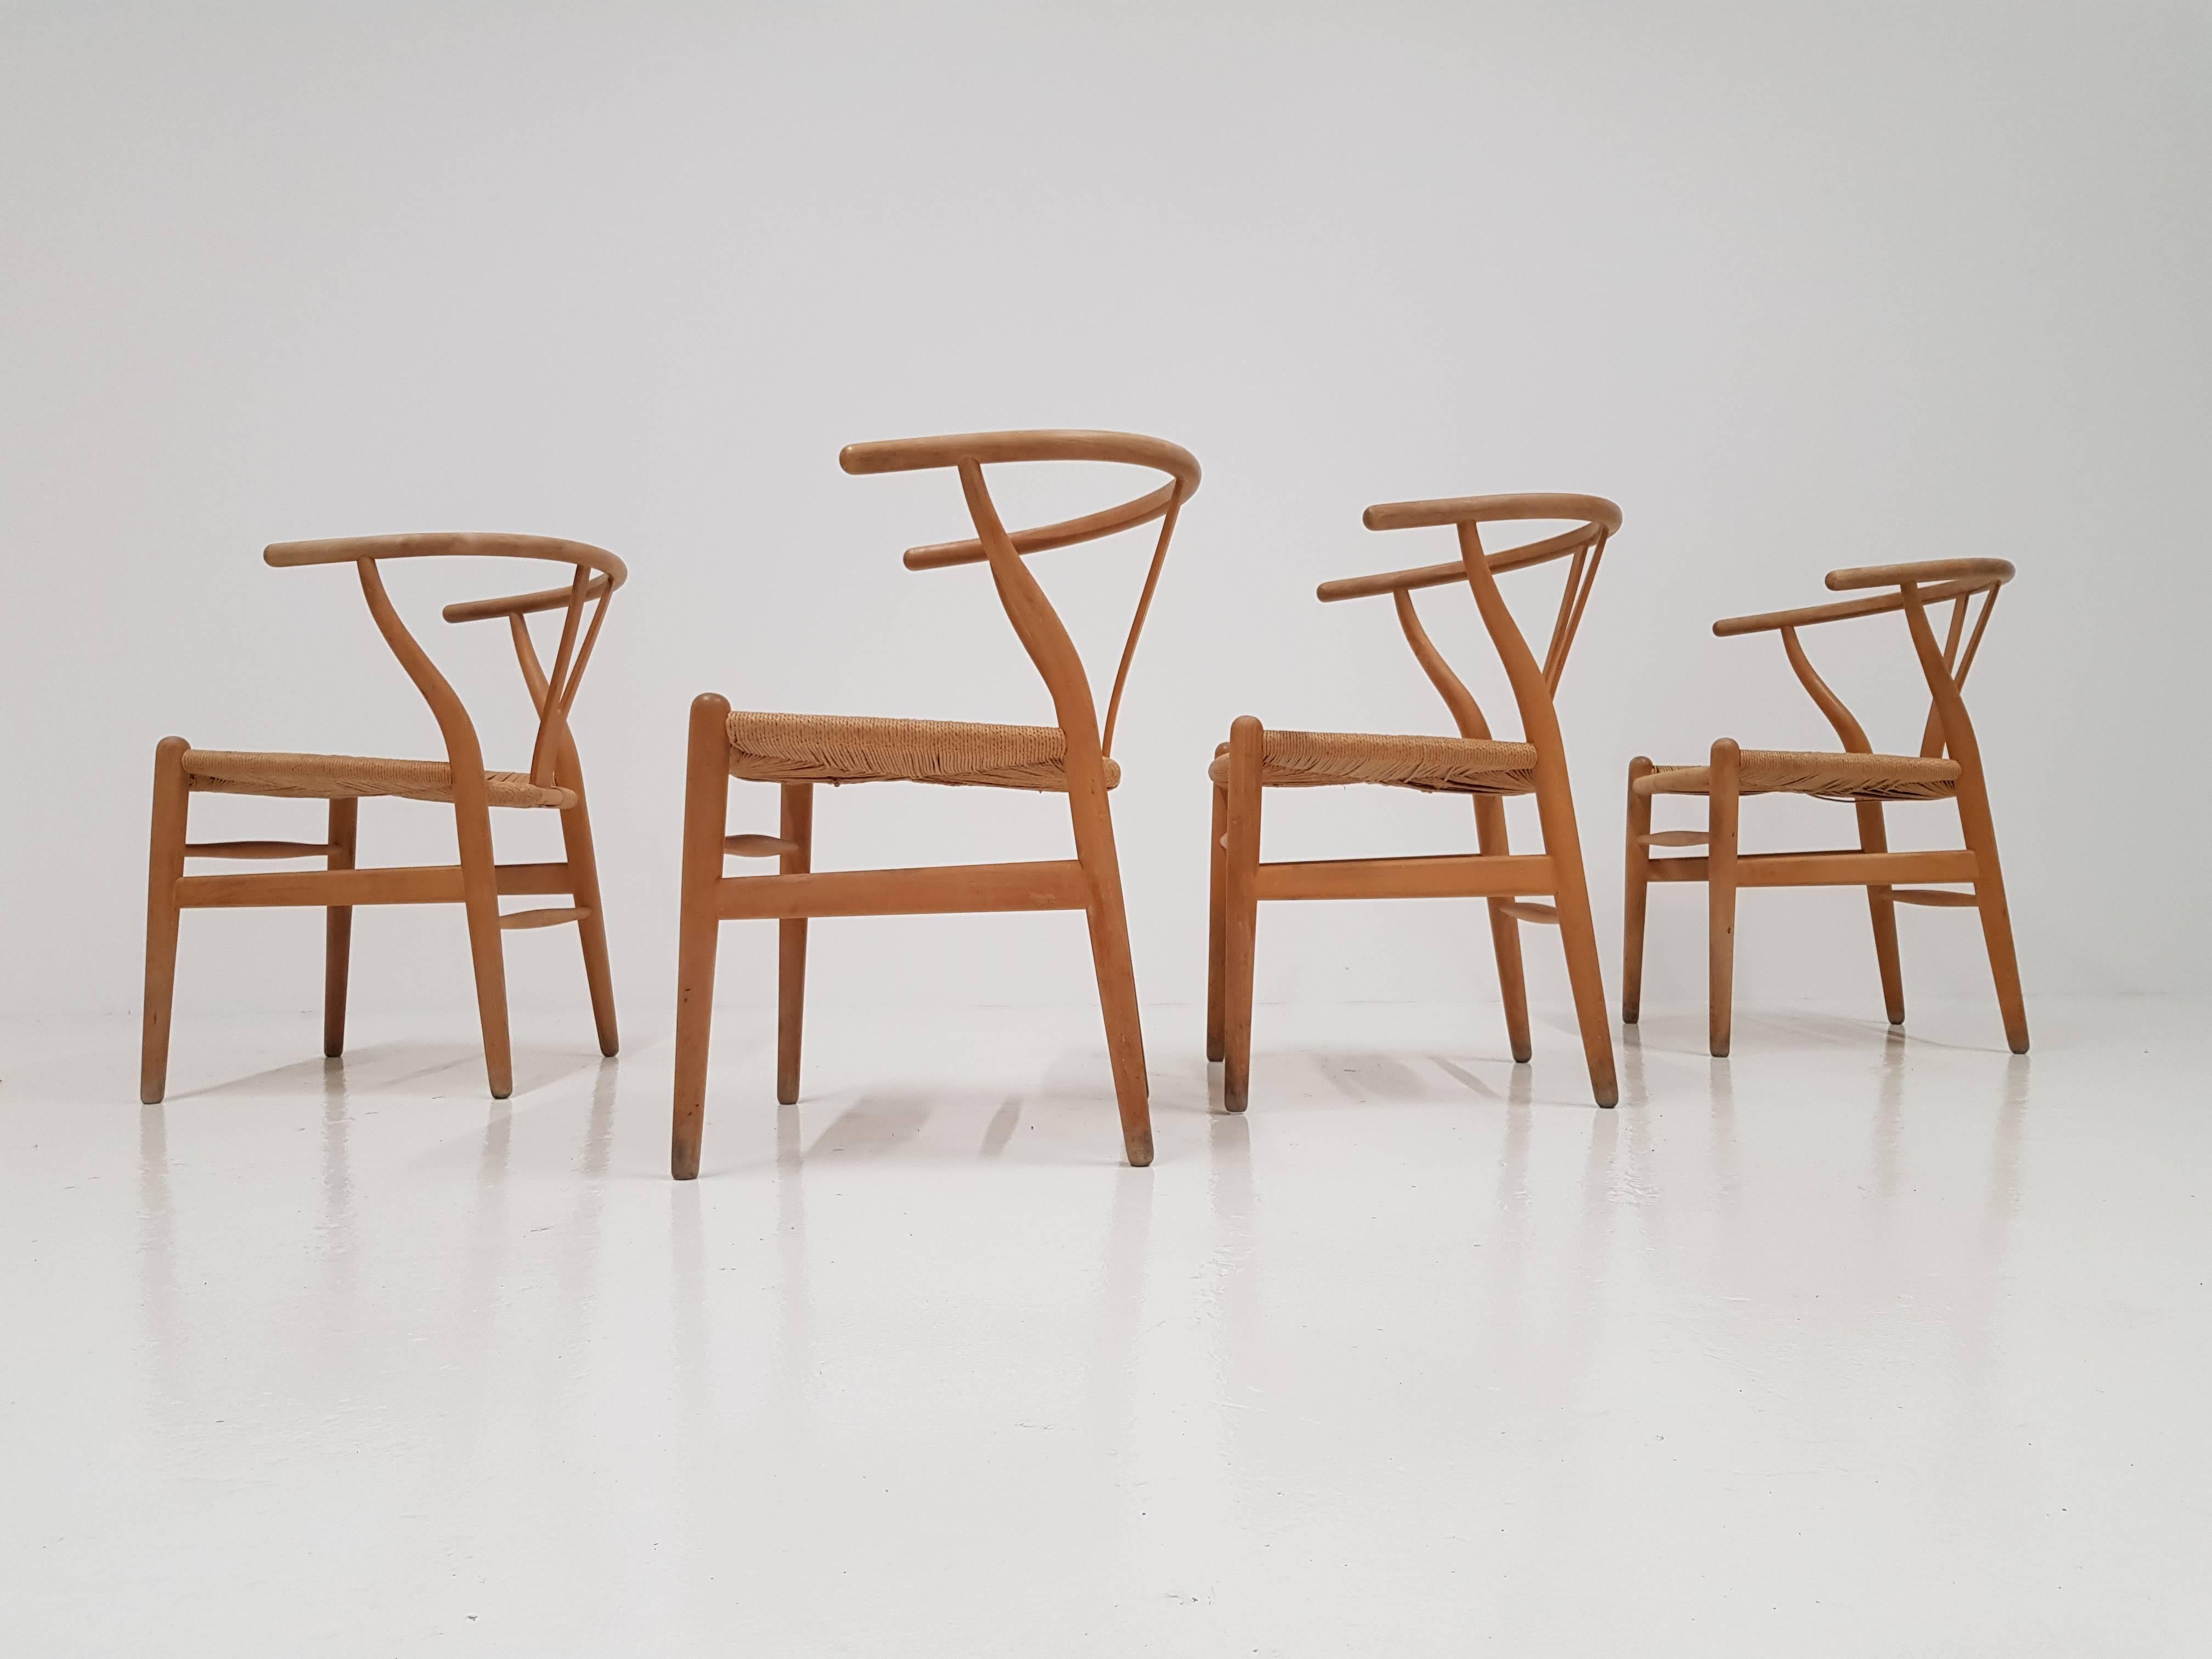 One of the most iconic Danish chairs, Hans J Wegner's CH24 'Wishbone' chairs.

Beech frame and woven paper cord seat. Produced by Carl Hansen & Søn.

General signs of wear, marks on legs, odd staining to paper cord but nothing that isn't